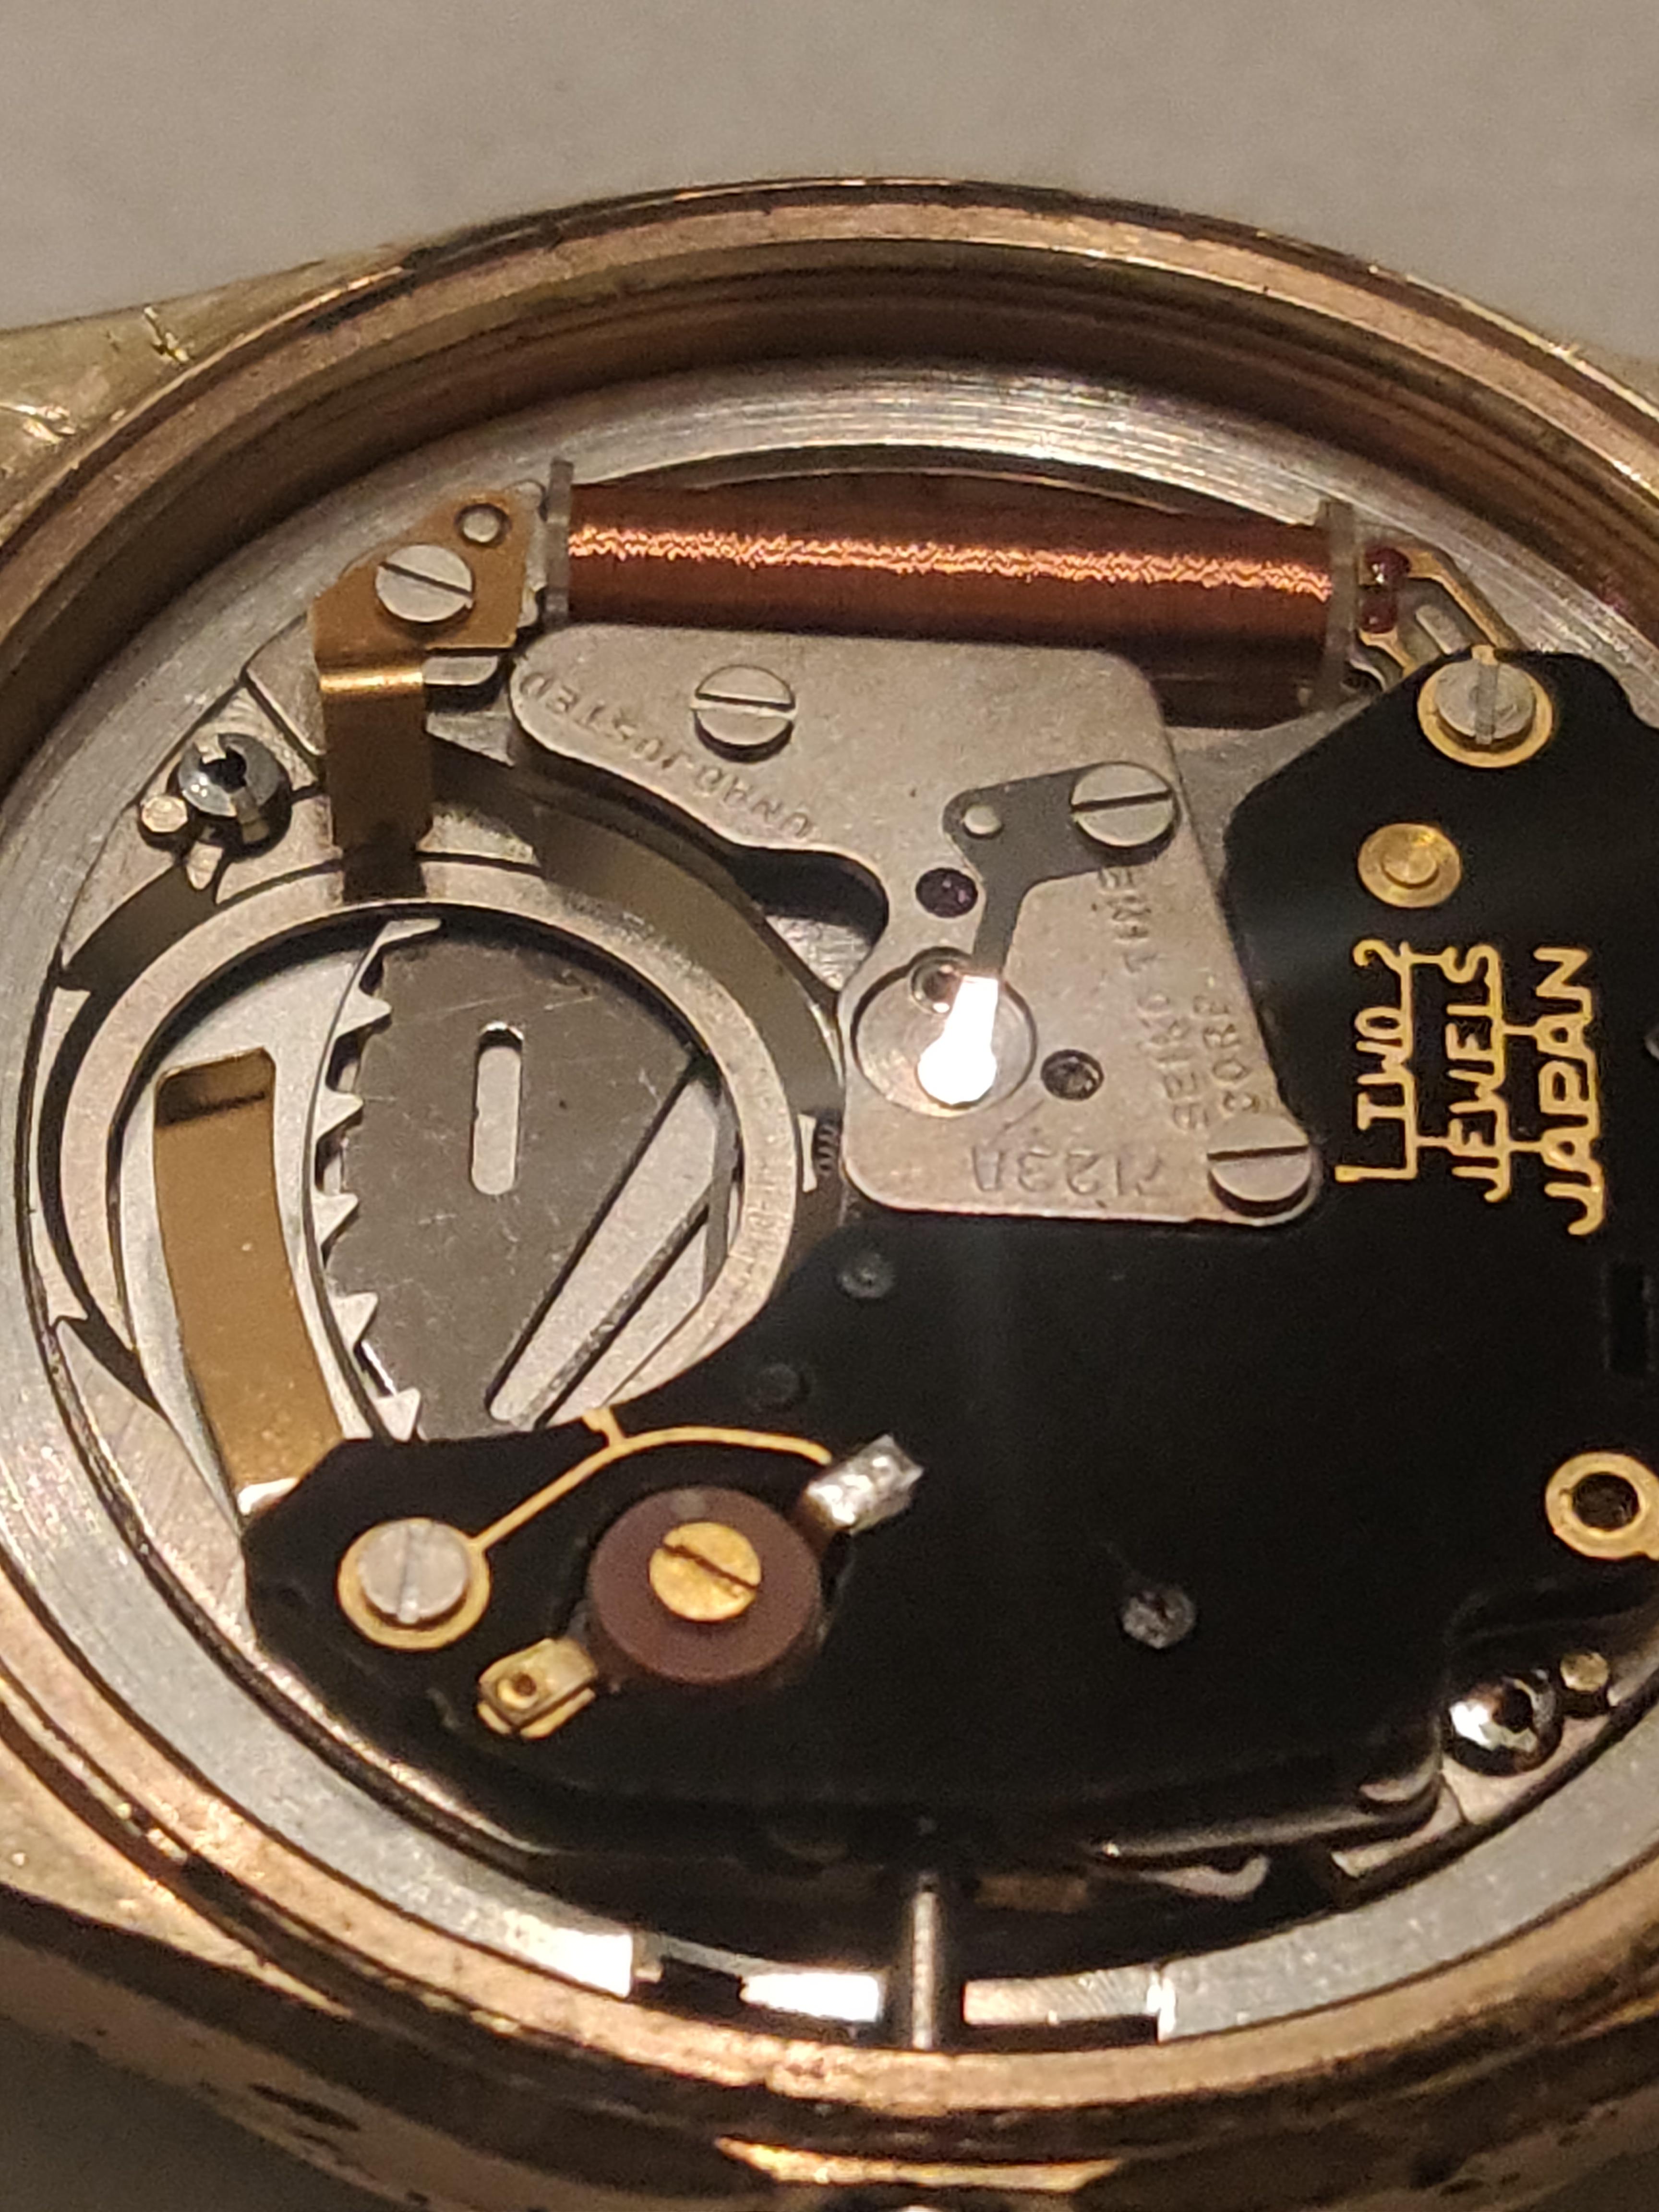 Total 99+ imagen how to remove a link from a seiko watch - Thptnganamst ...